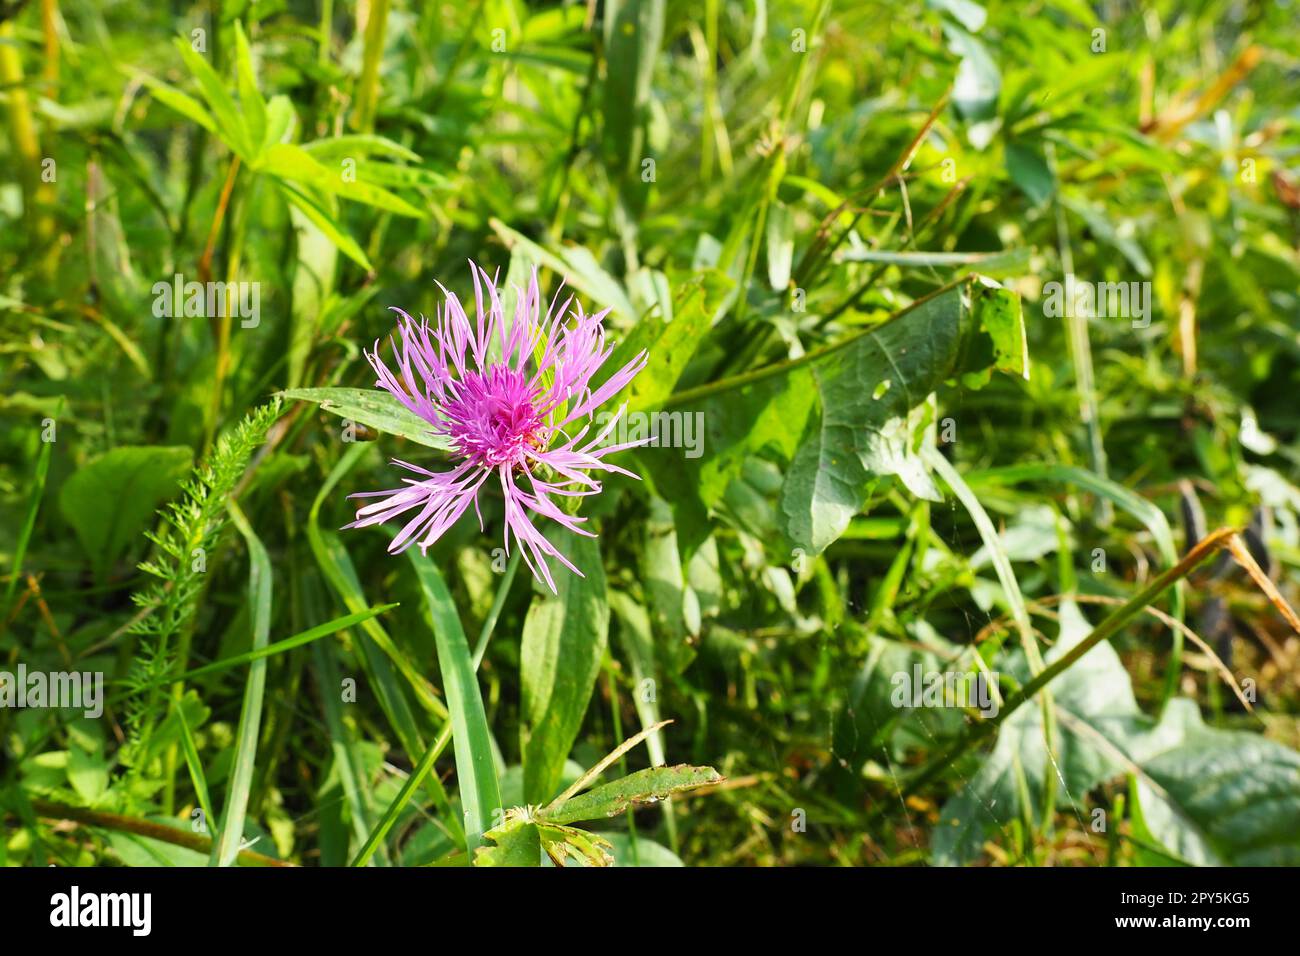 Meadow cornflower Centaurea jacea is a field weed plant, a species of the genus Cornflower of the family Asteraceae, or Compositae. Grows in meadows and forest edges. Violet elegant flower. Karelia Stock Photo